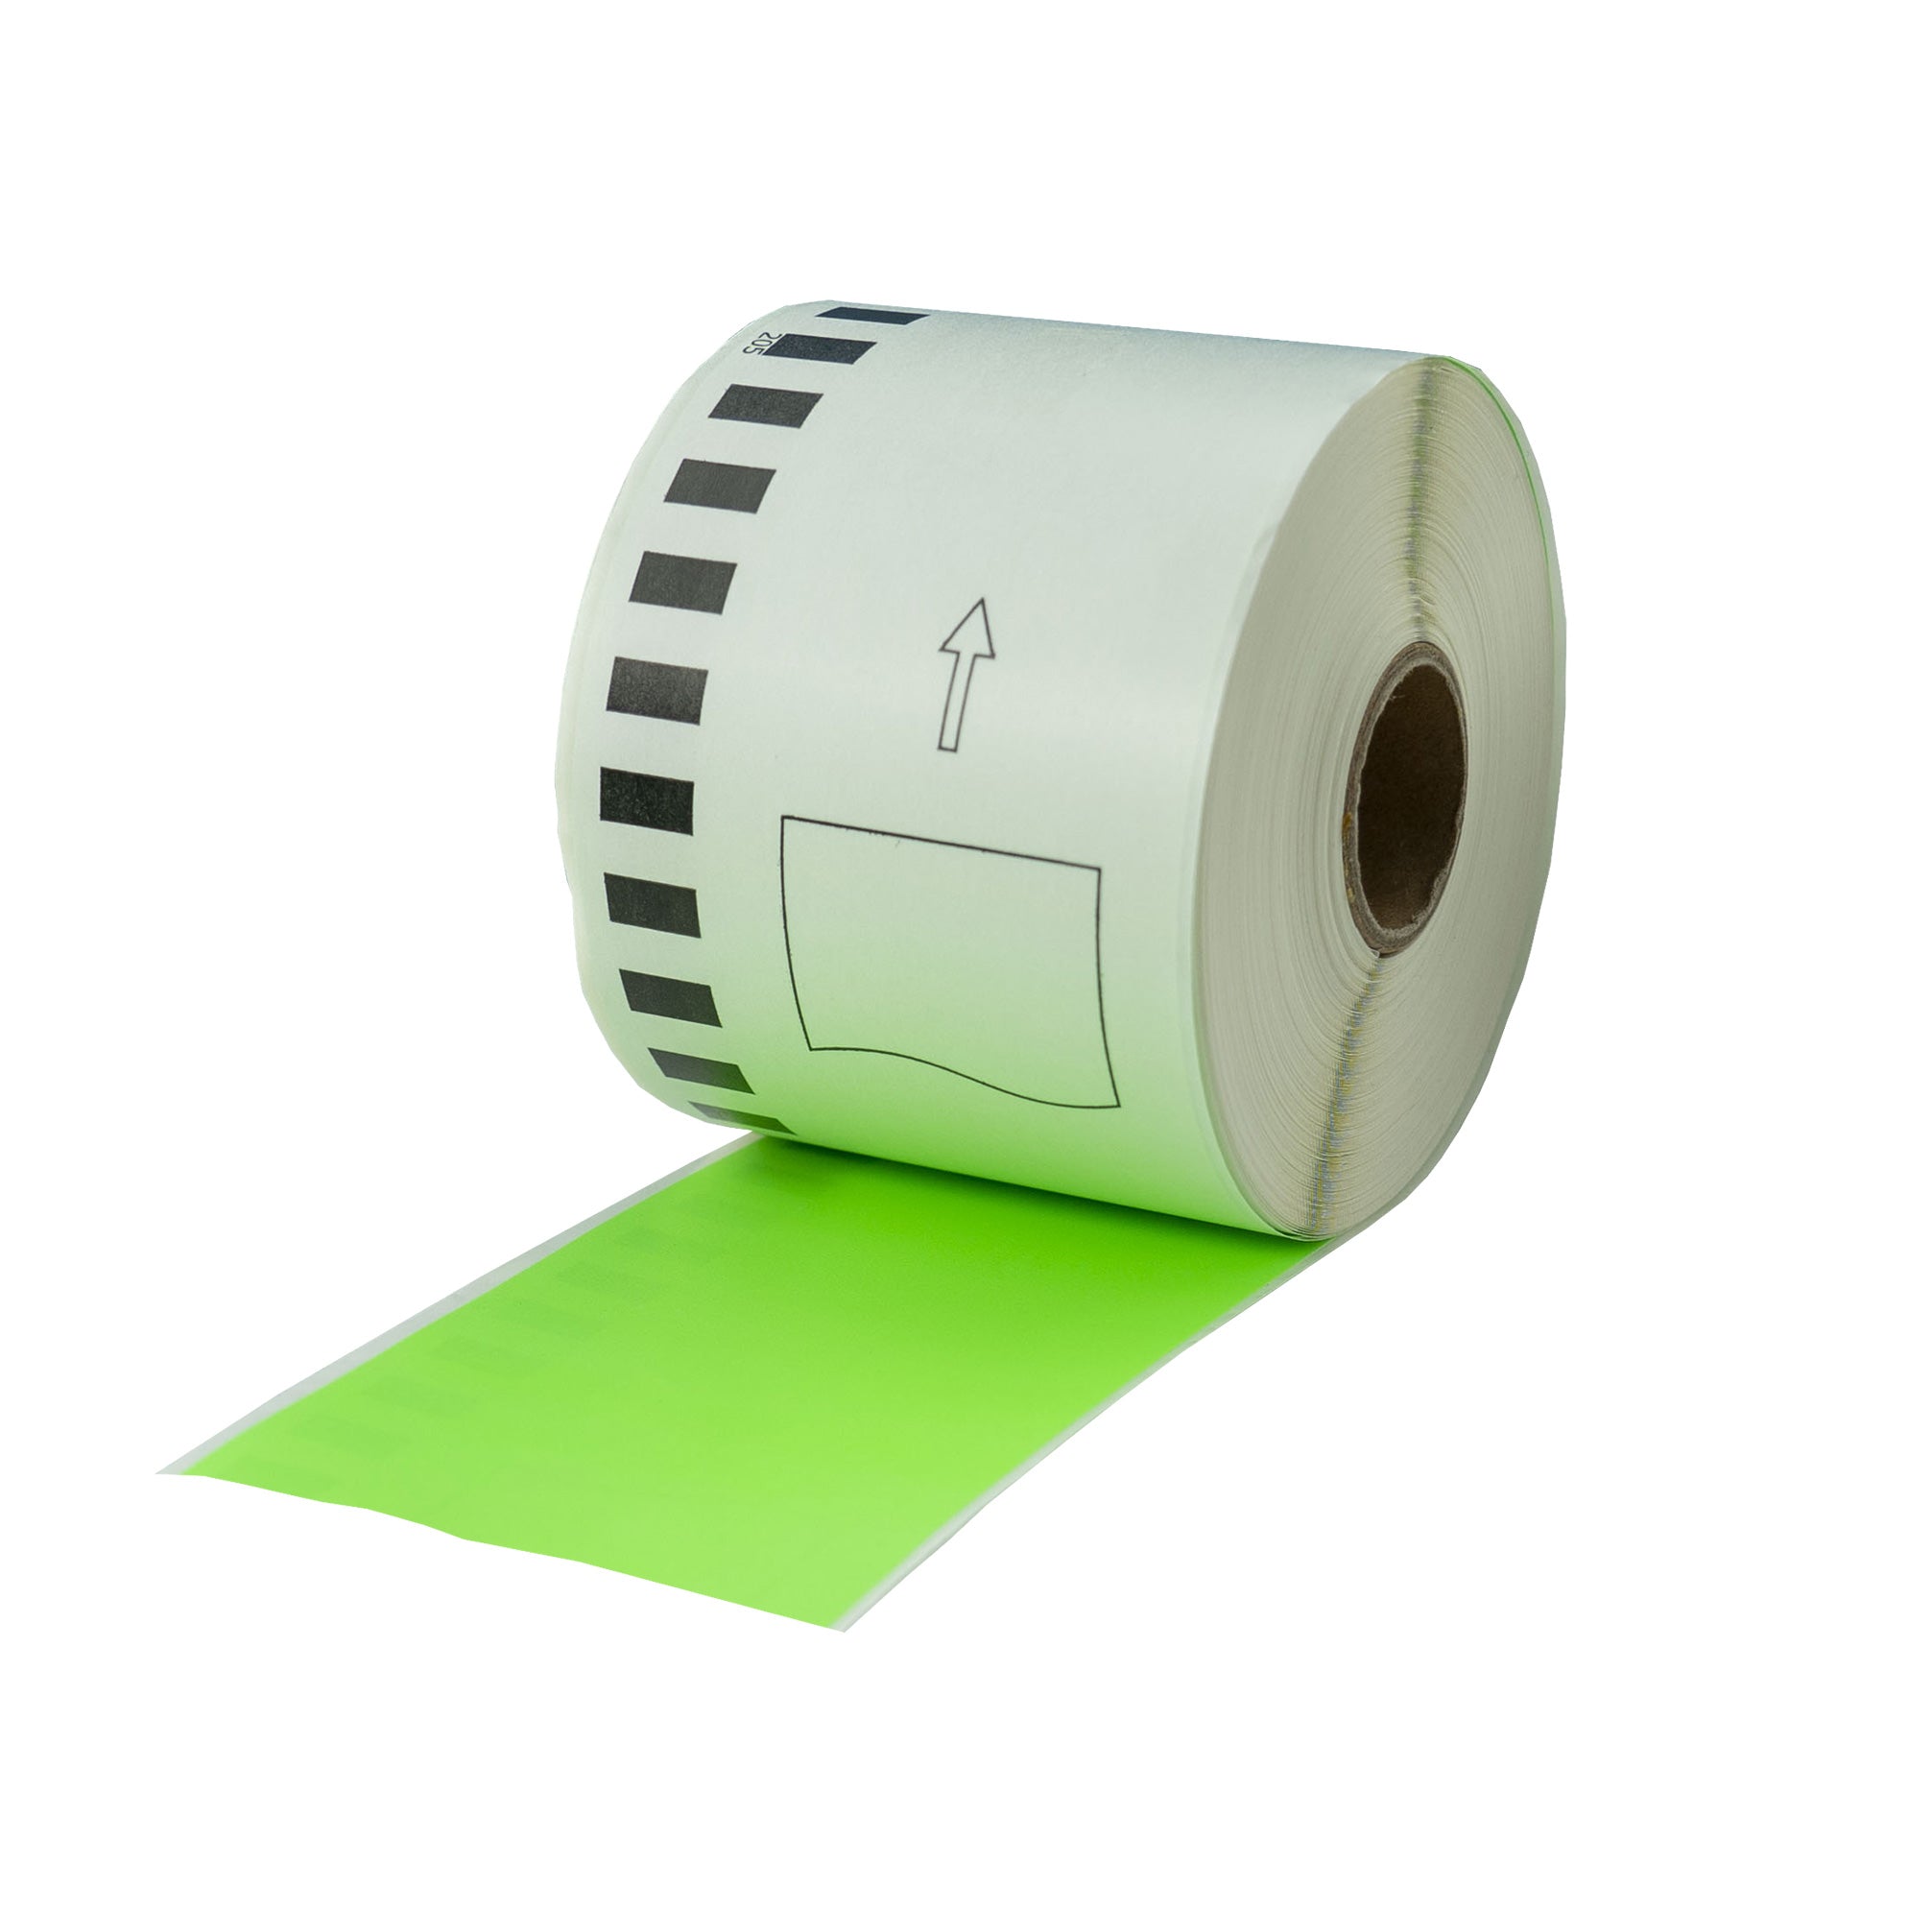 Compatible Brother DK-22205 Green Refill Label Tapes 62mm x 30.4m/ 50 Rolls